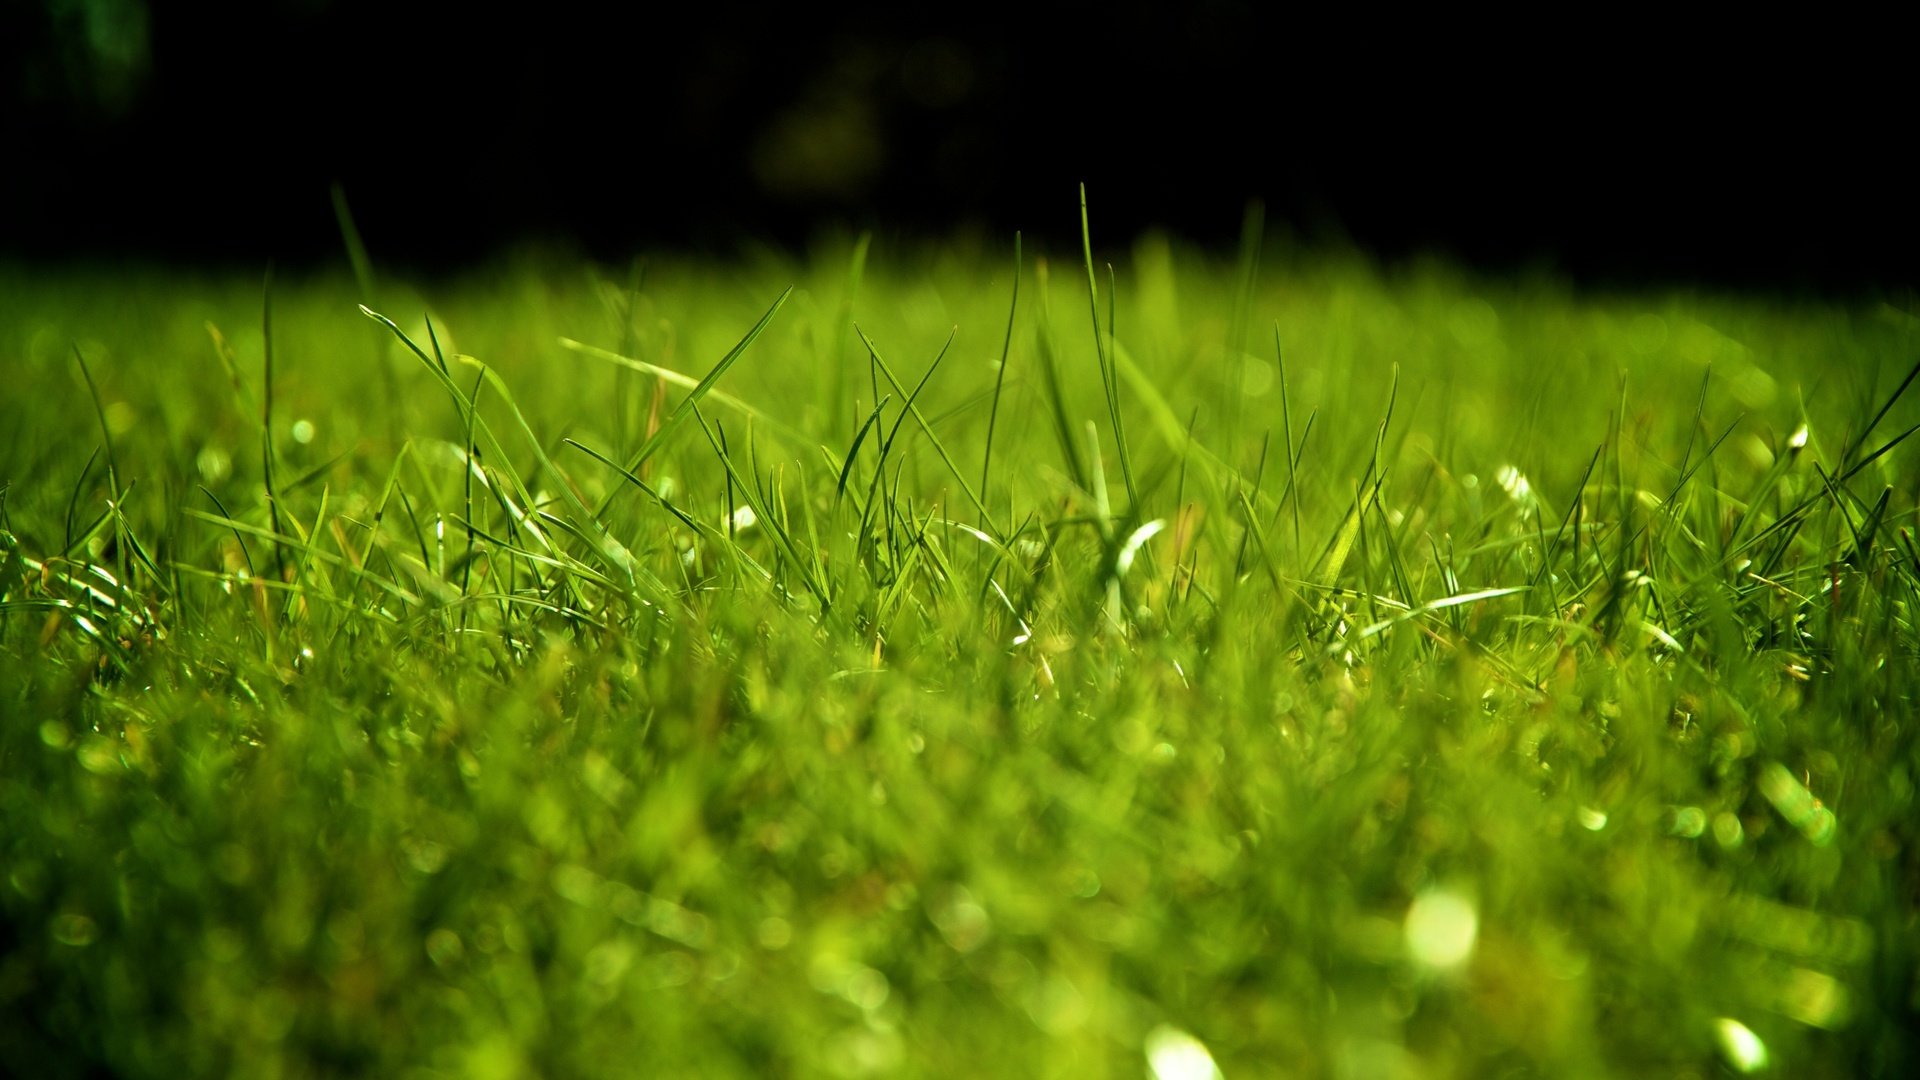 Download 1080p Grass PC wallpaper ID:377705 for free